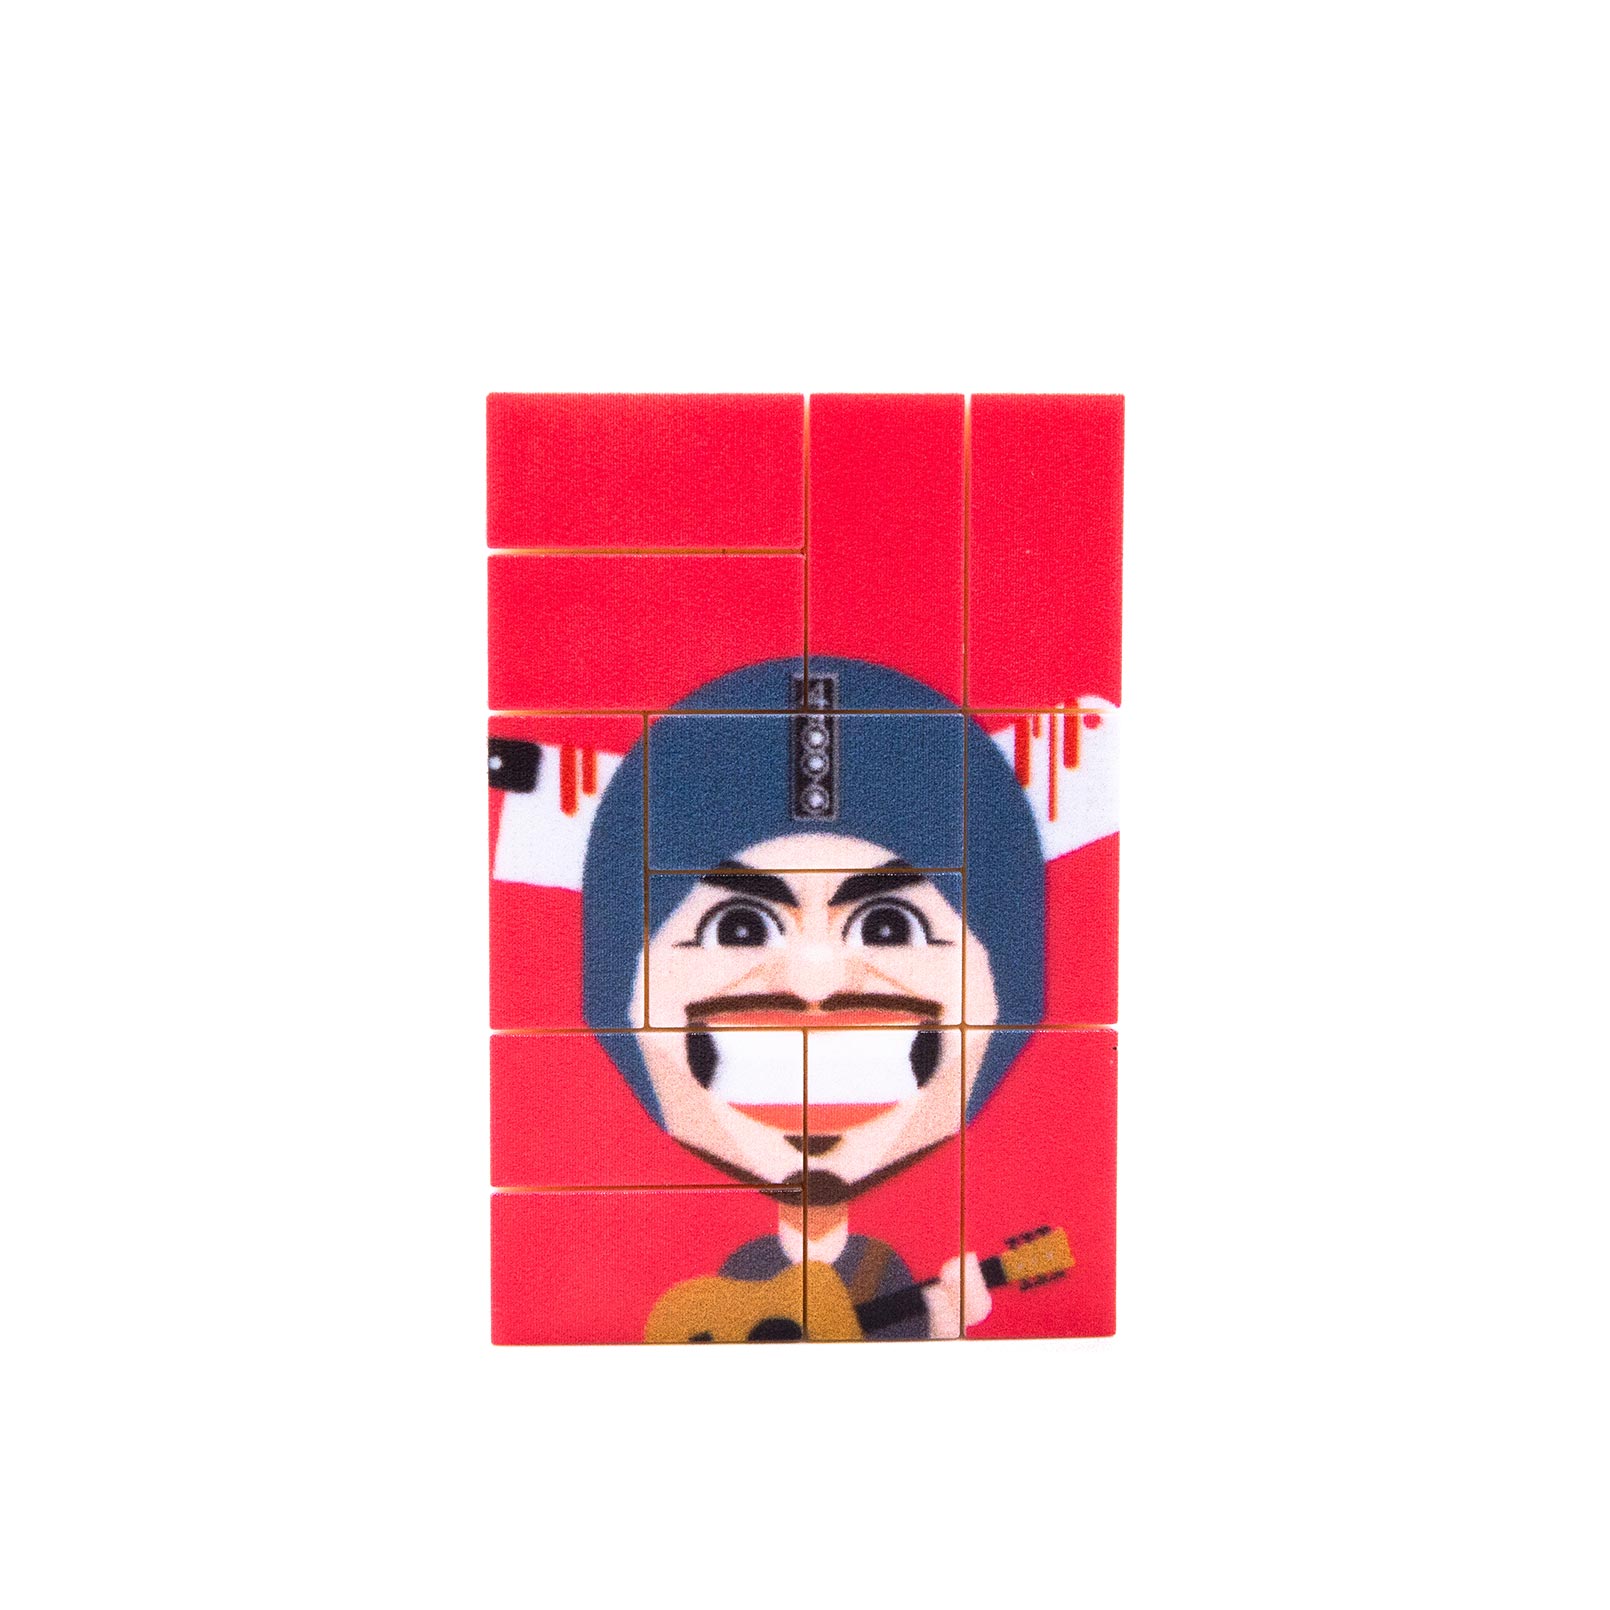 4896 x Namewee Magnet Puzzle (Red)